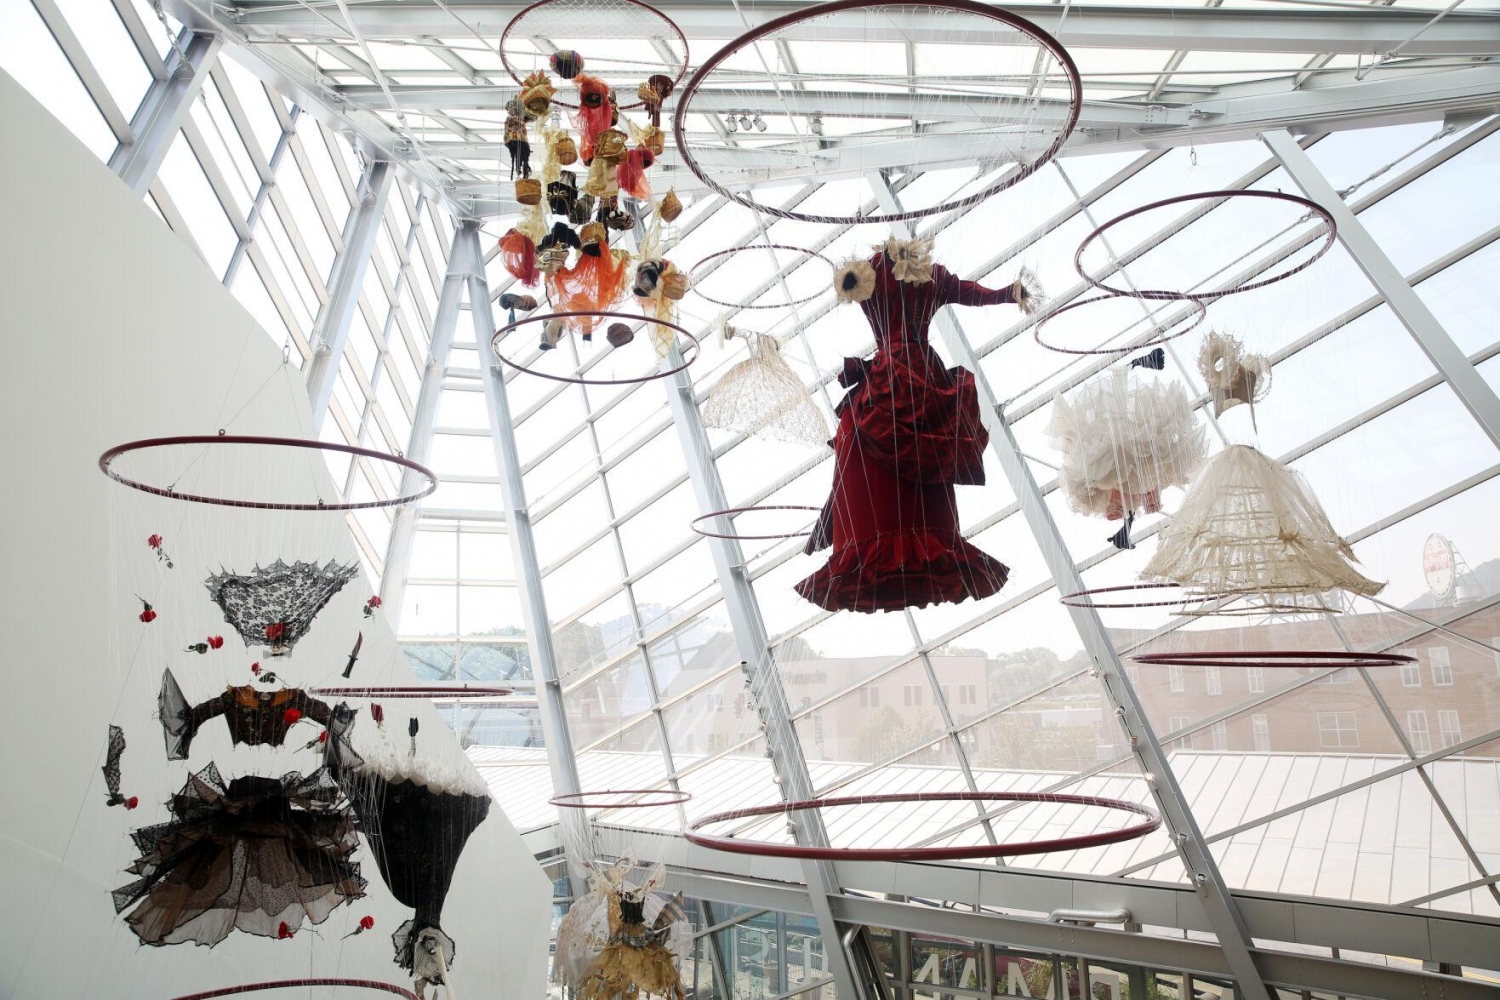 A new exhibit hangs in the Taubman Museum of Art atrium with repurposed costumes from the New York City Opera. Artist E.V. Day&amp;rsquo;s &amp;ldquo;Divas Ascending&amp;rdquo; includes sculptures representing iconic women from well-known operas.

Photos, Heather Rousseau, The Roanoke Times